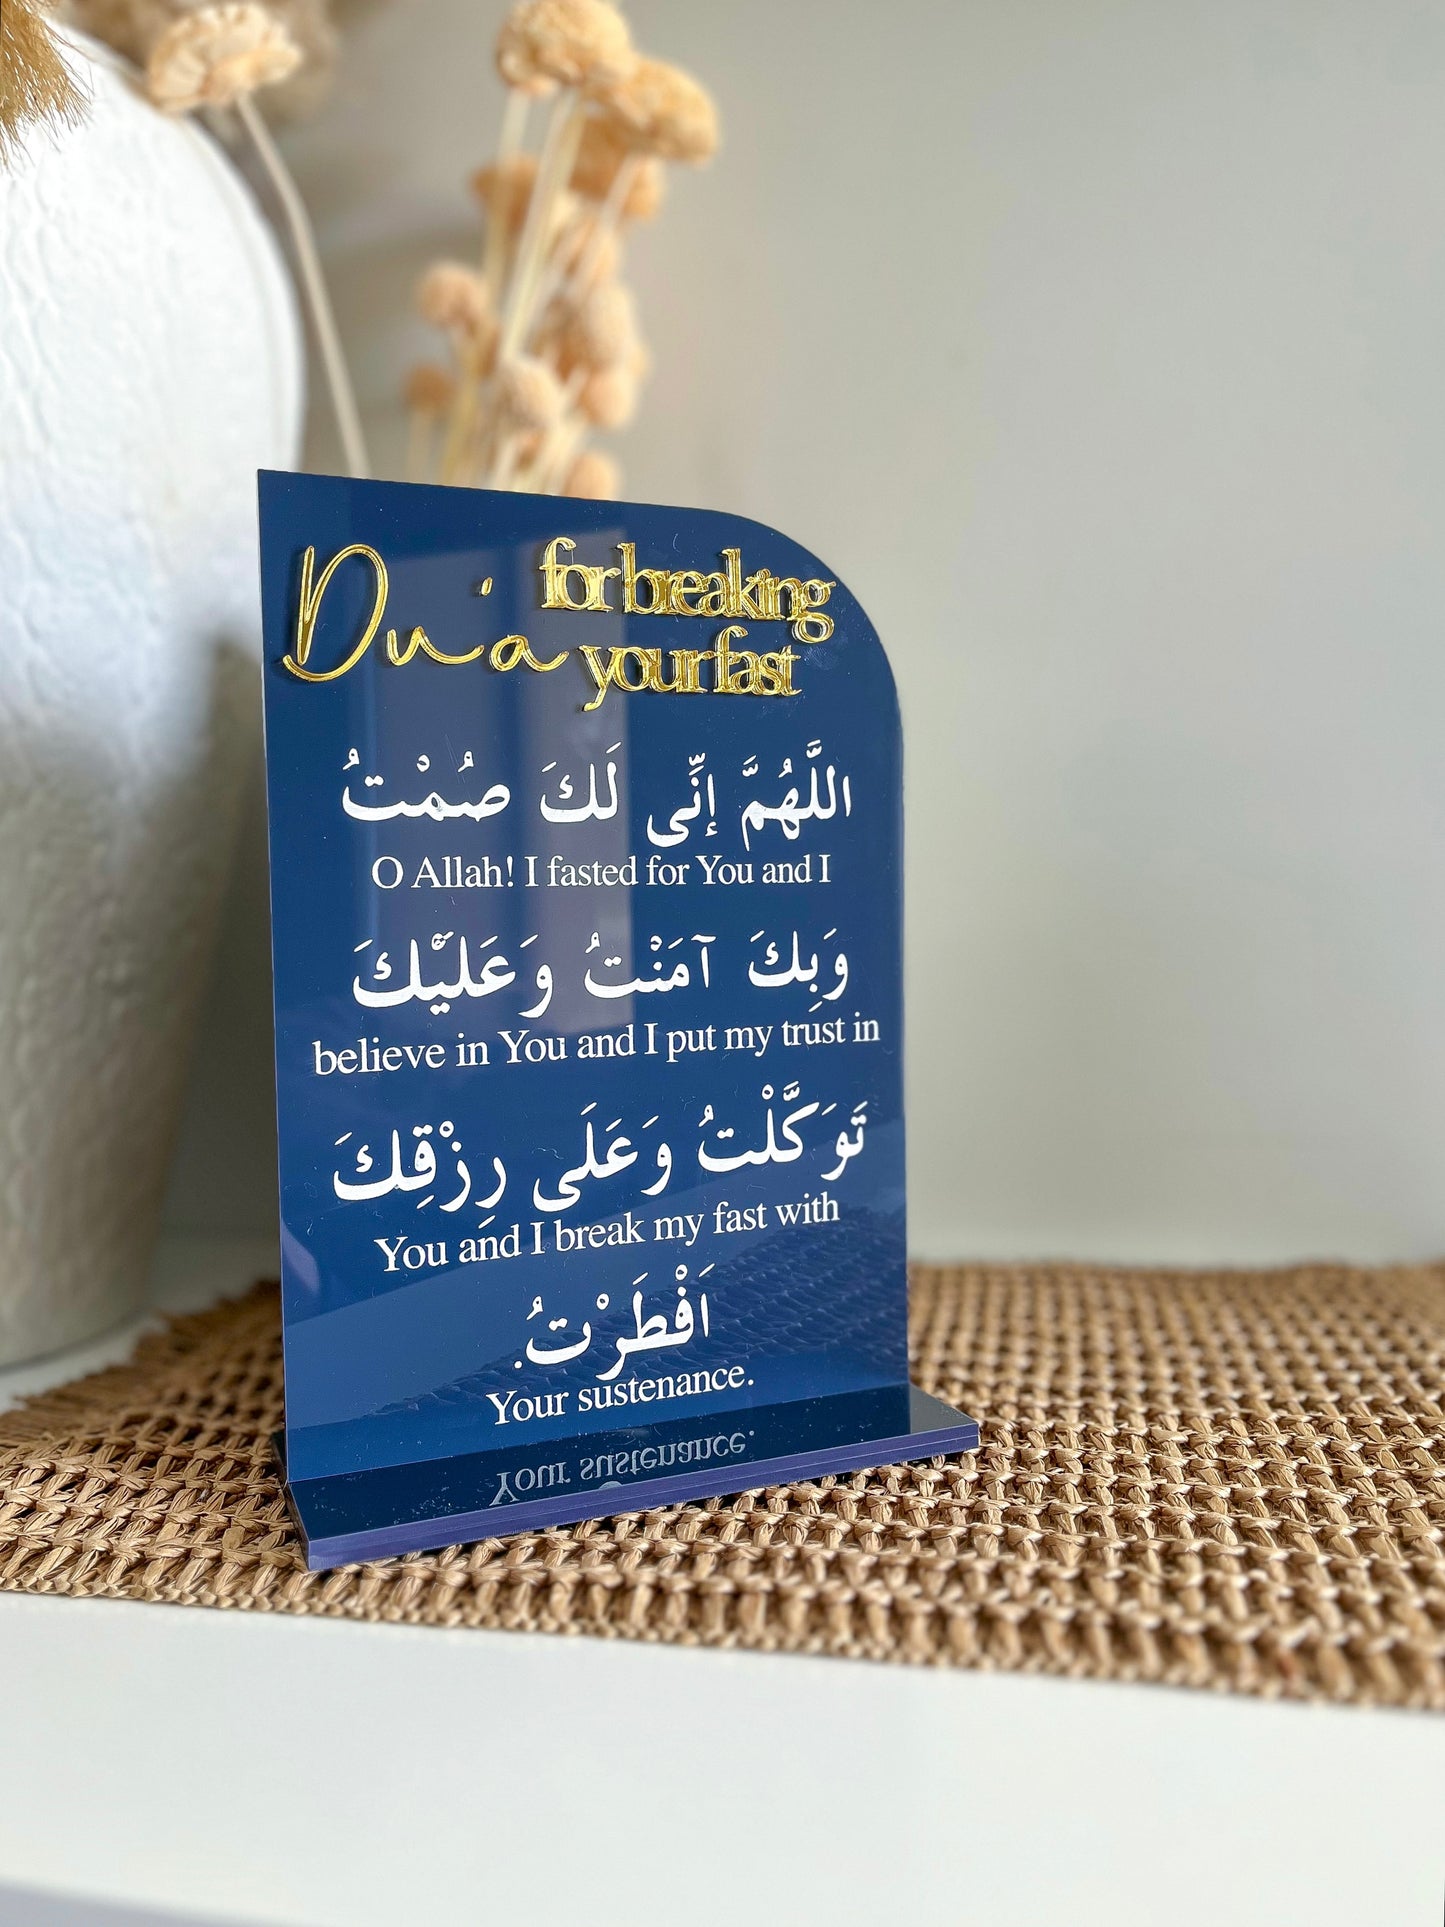 Du'a/Supplication For Breaking Your Fast